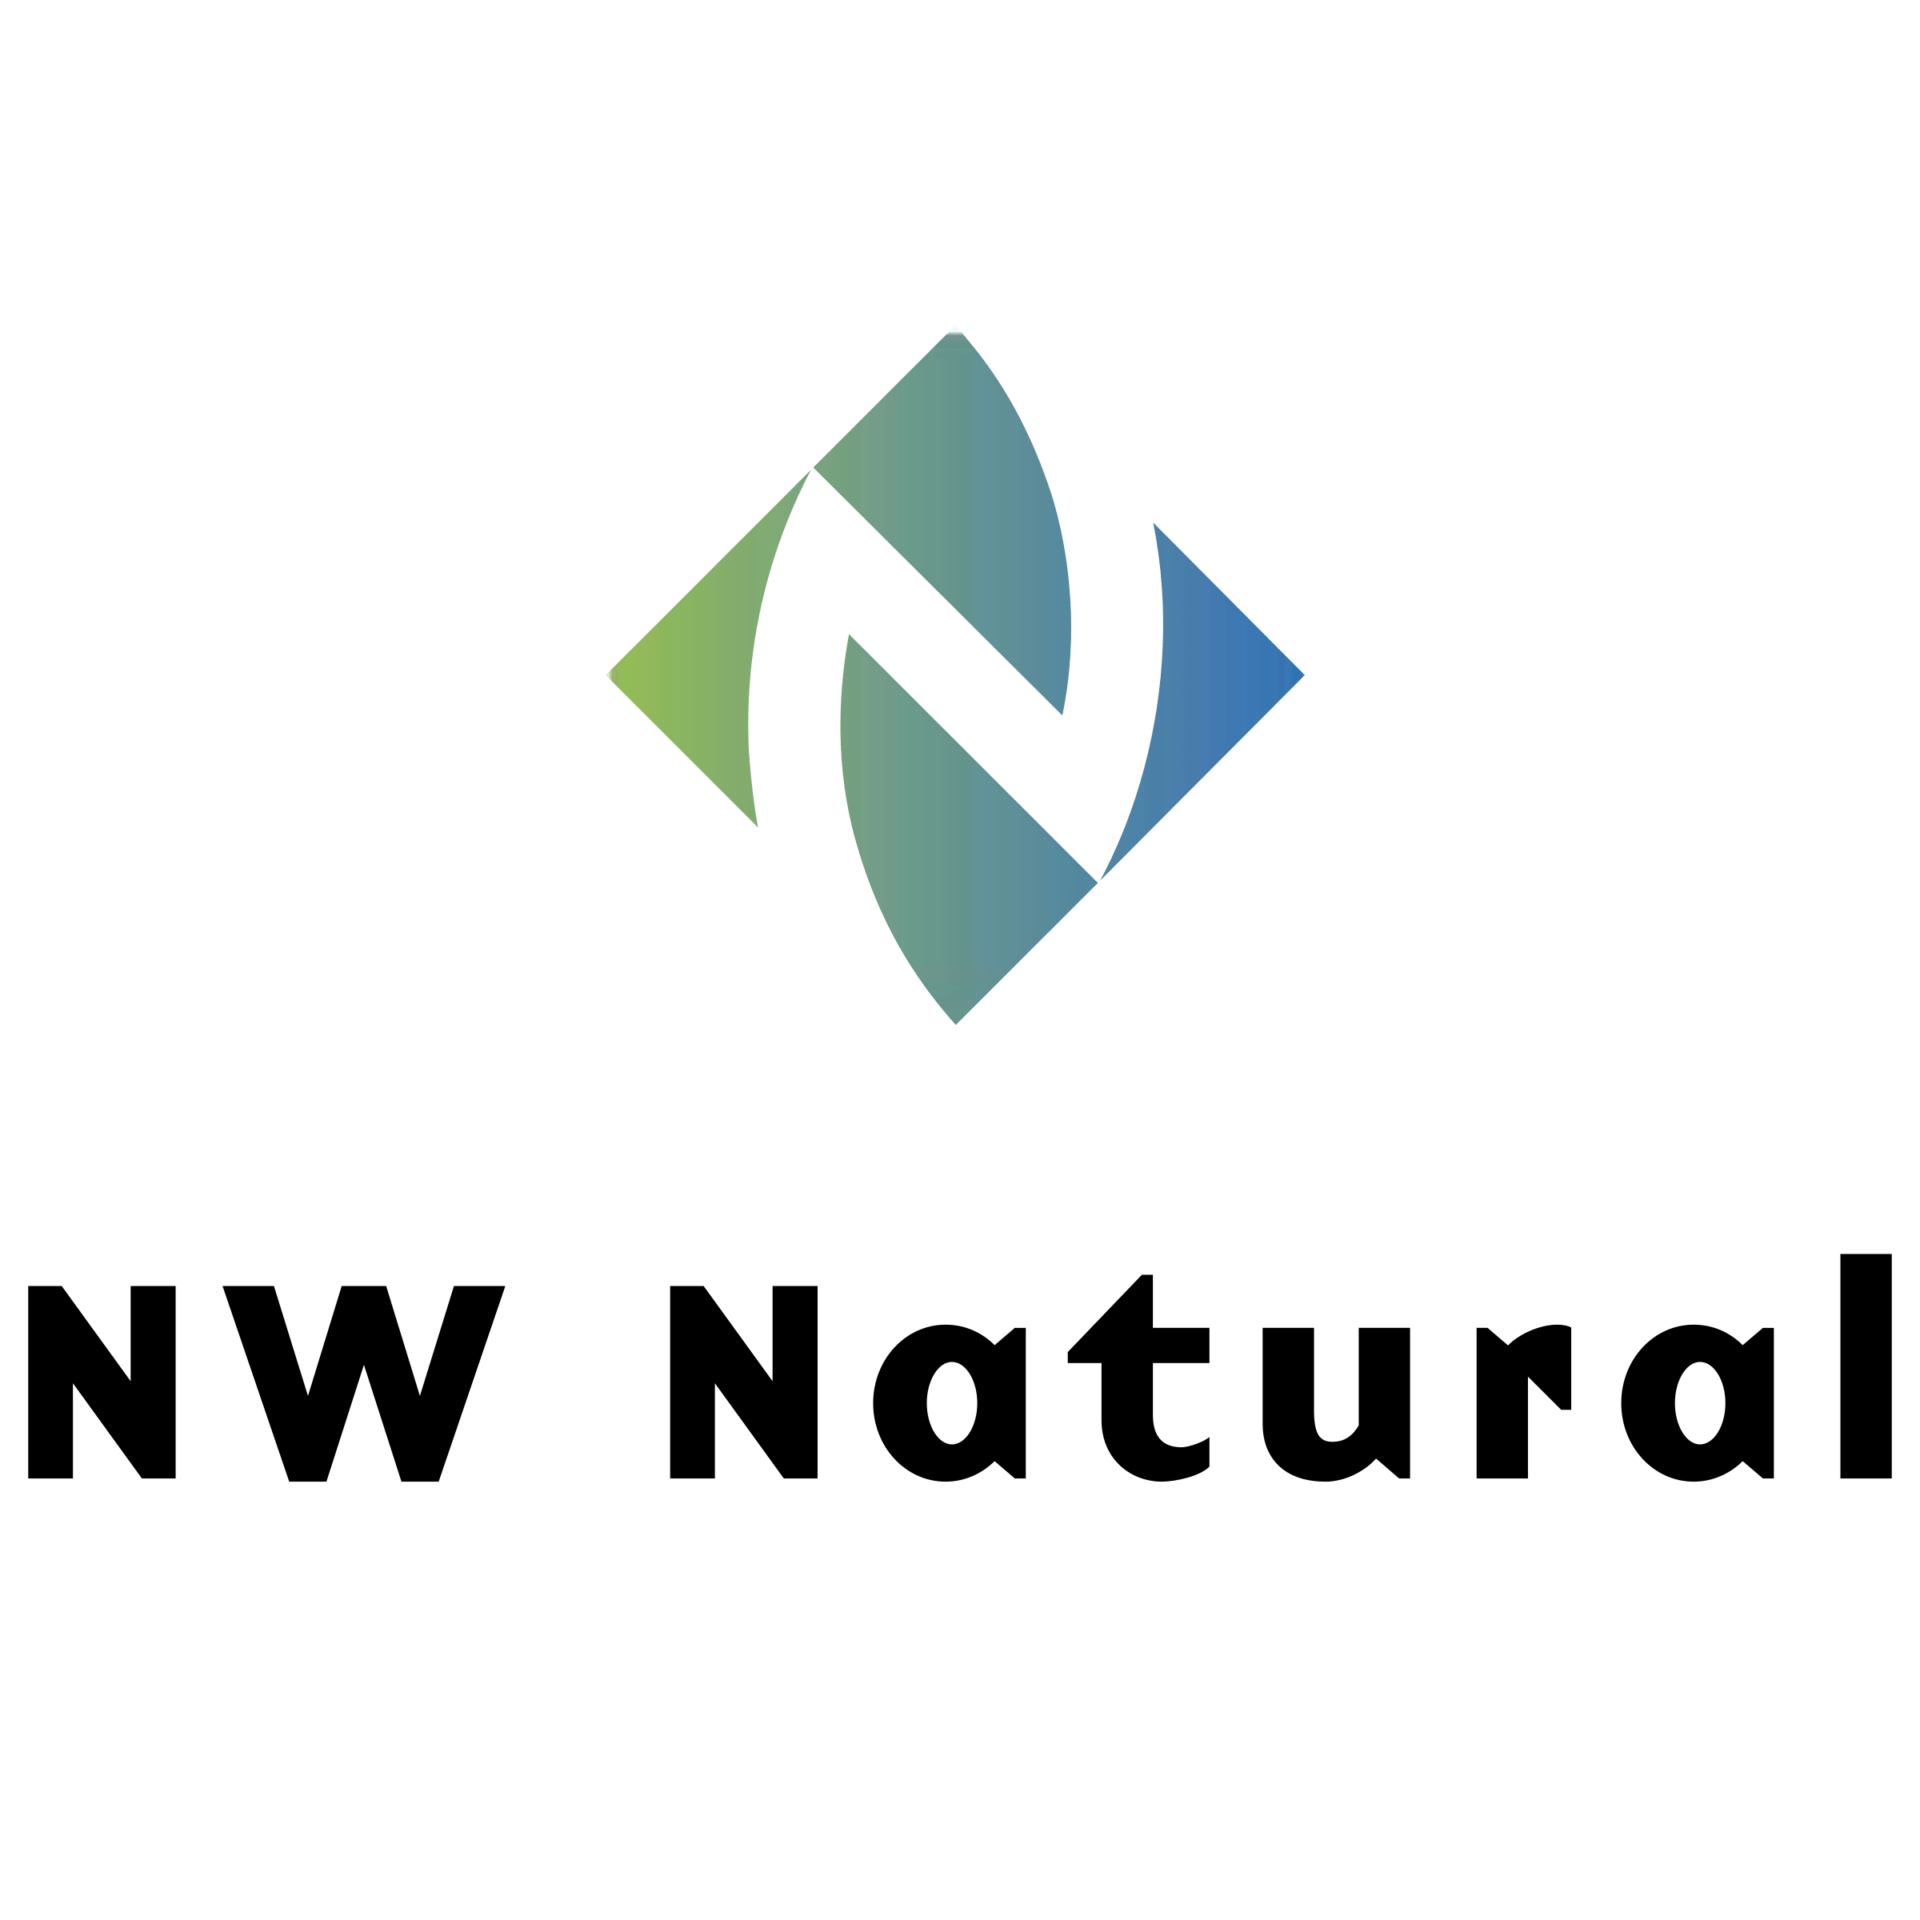 NW Natural to Partner with Modern Electron